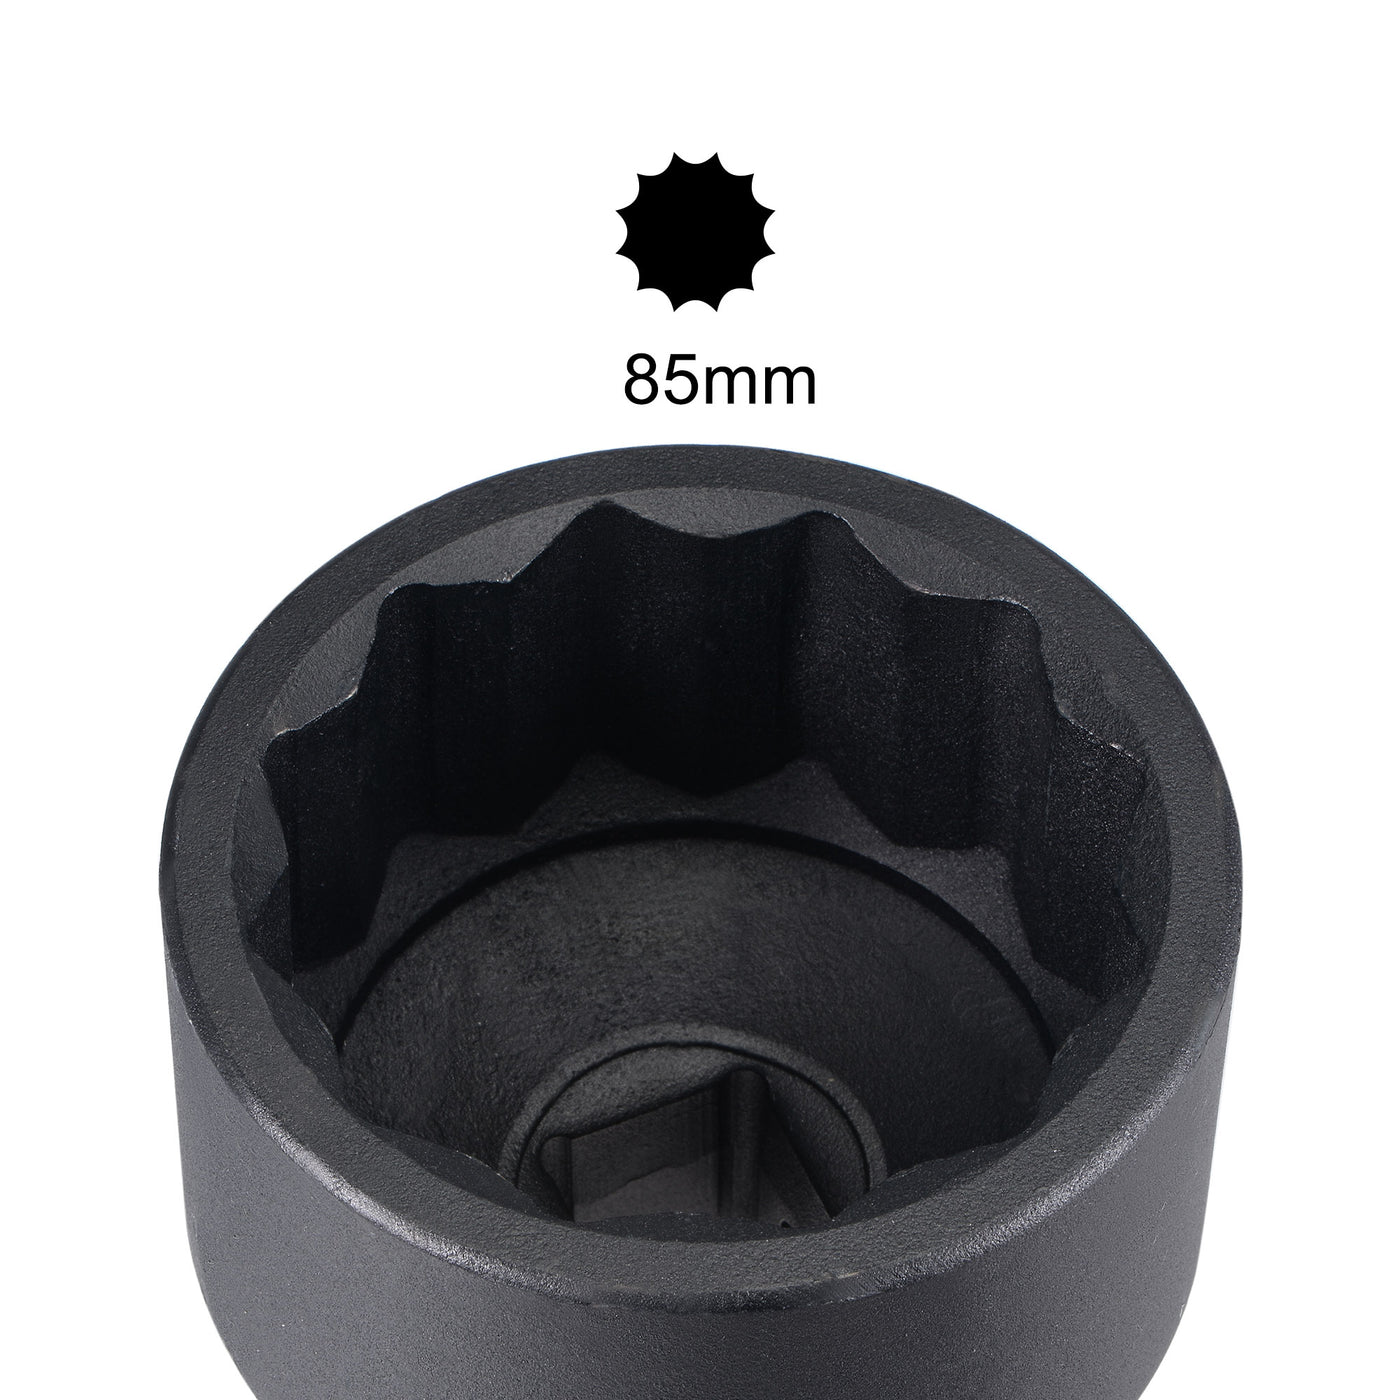 uxcell Uxcell 1-Inch Drive 85mm 12-Point Impact Socket, CR-MO Steel 102mm Length, Standard Metric Sizes